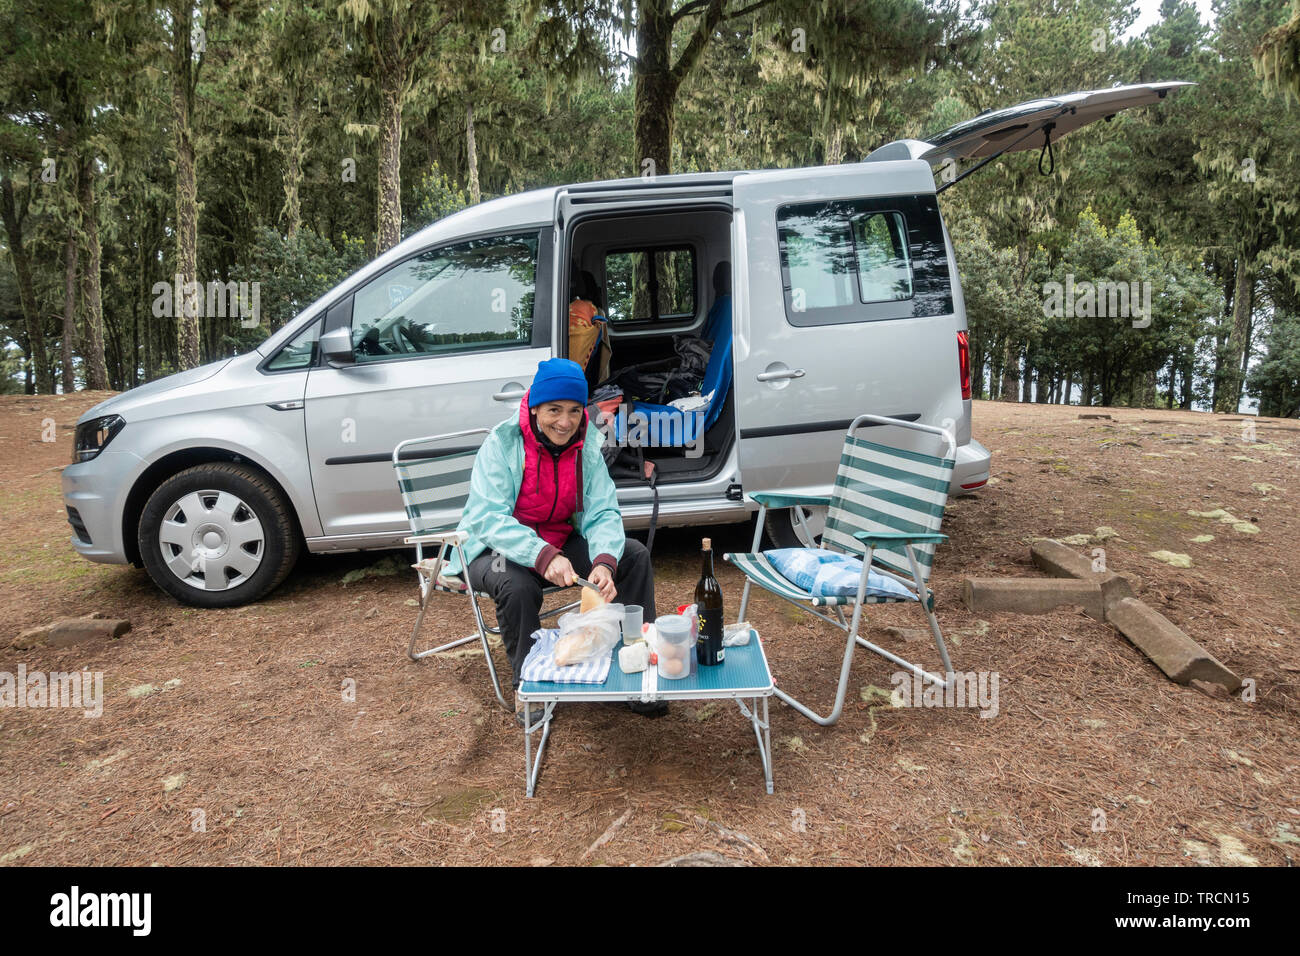 Woman with food and wine on picnic table next to small camper van in pine forest campsite in Spain. Stock Photo